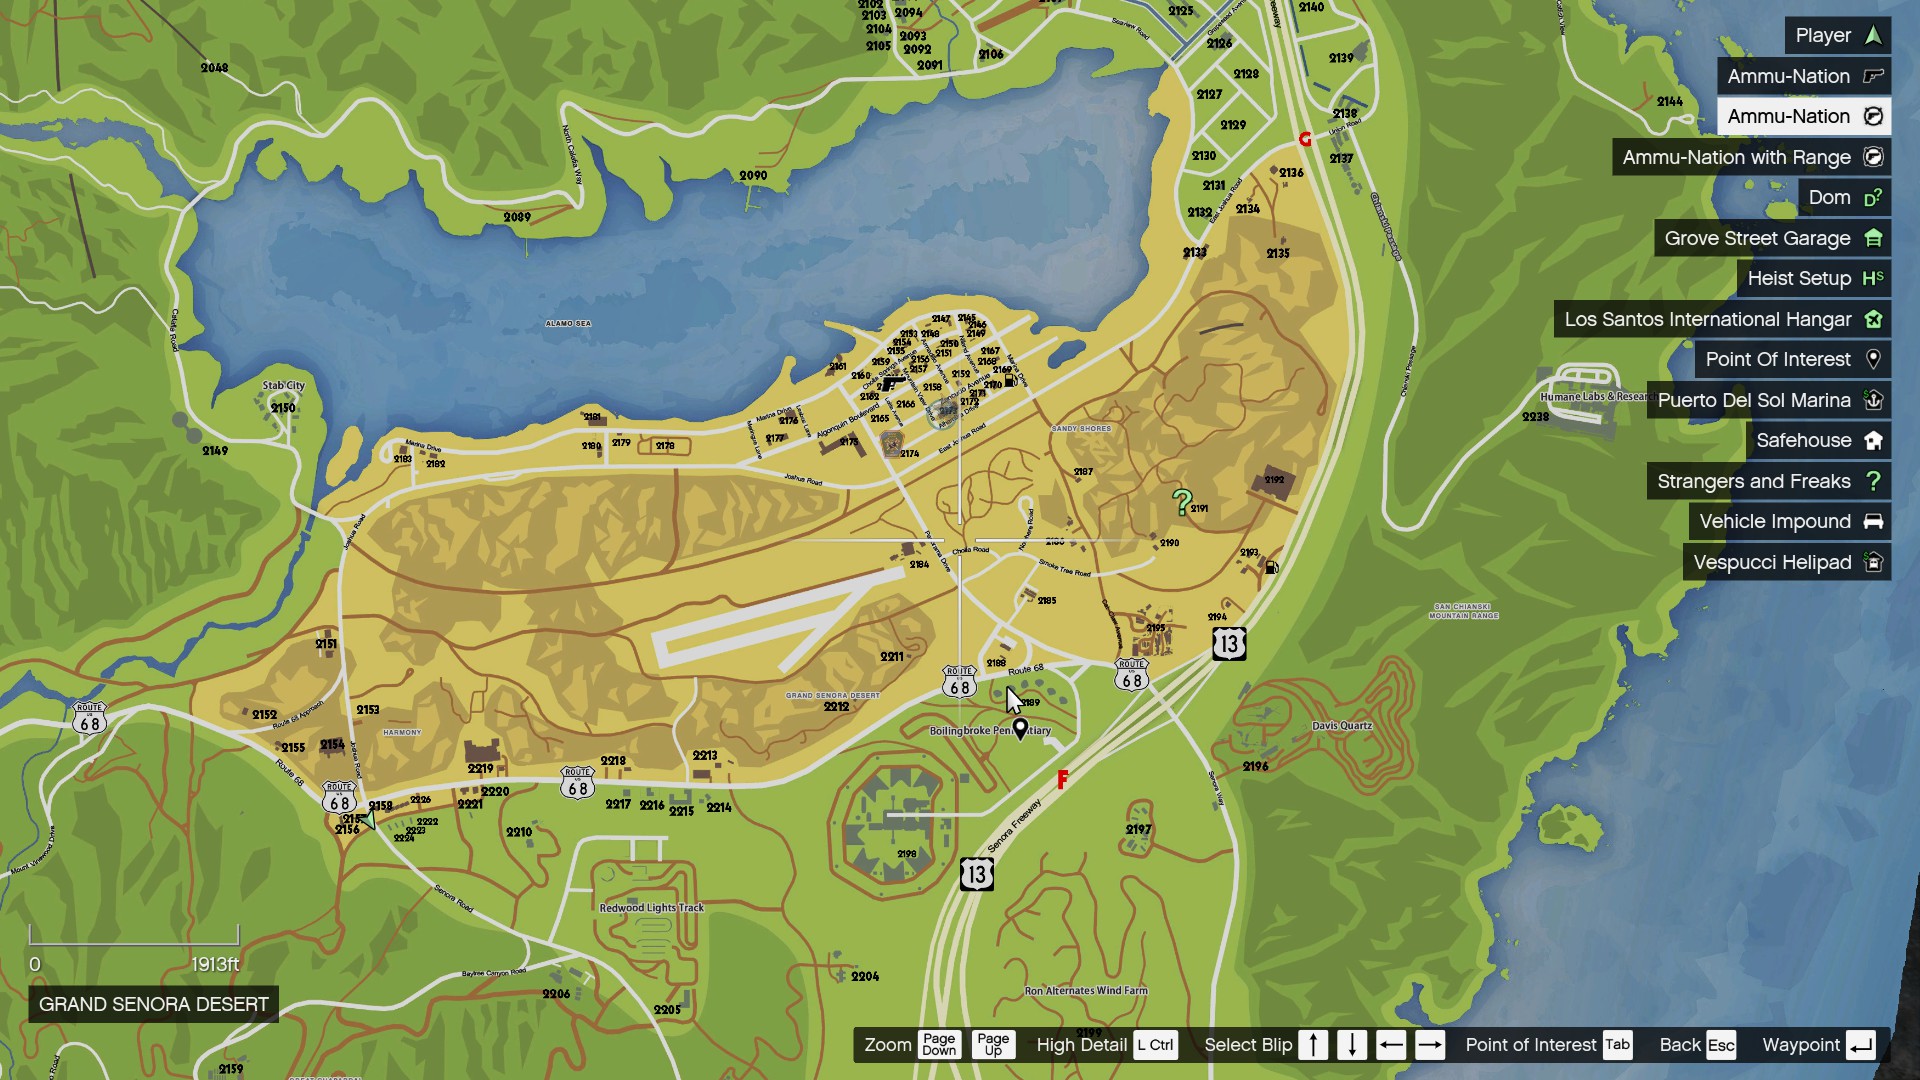 Gta 5 map with street names фото 57